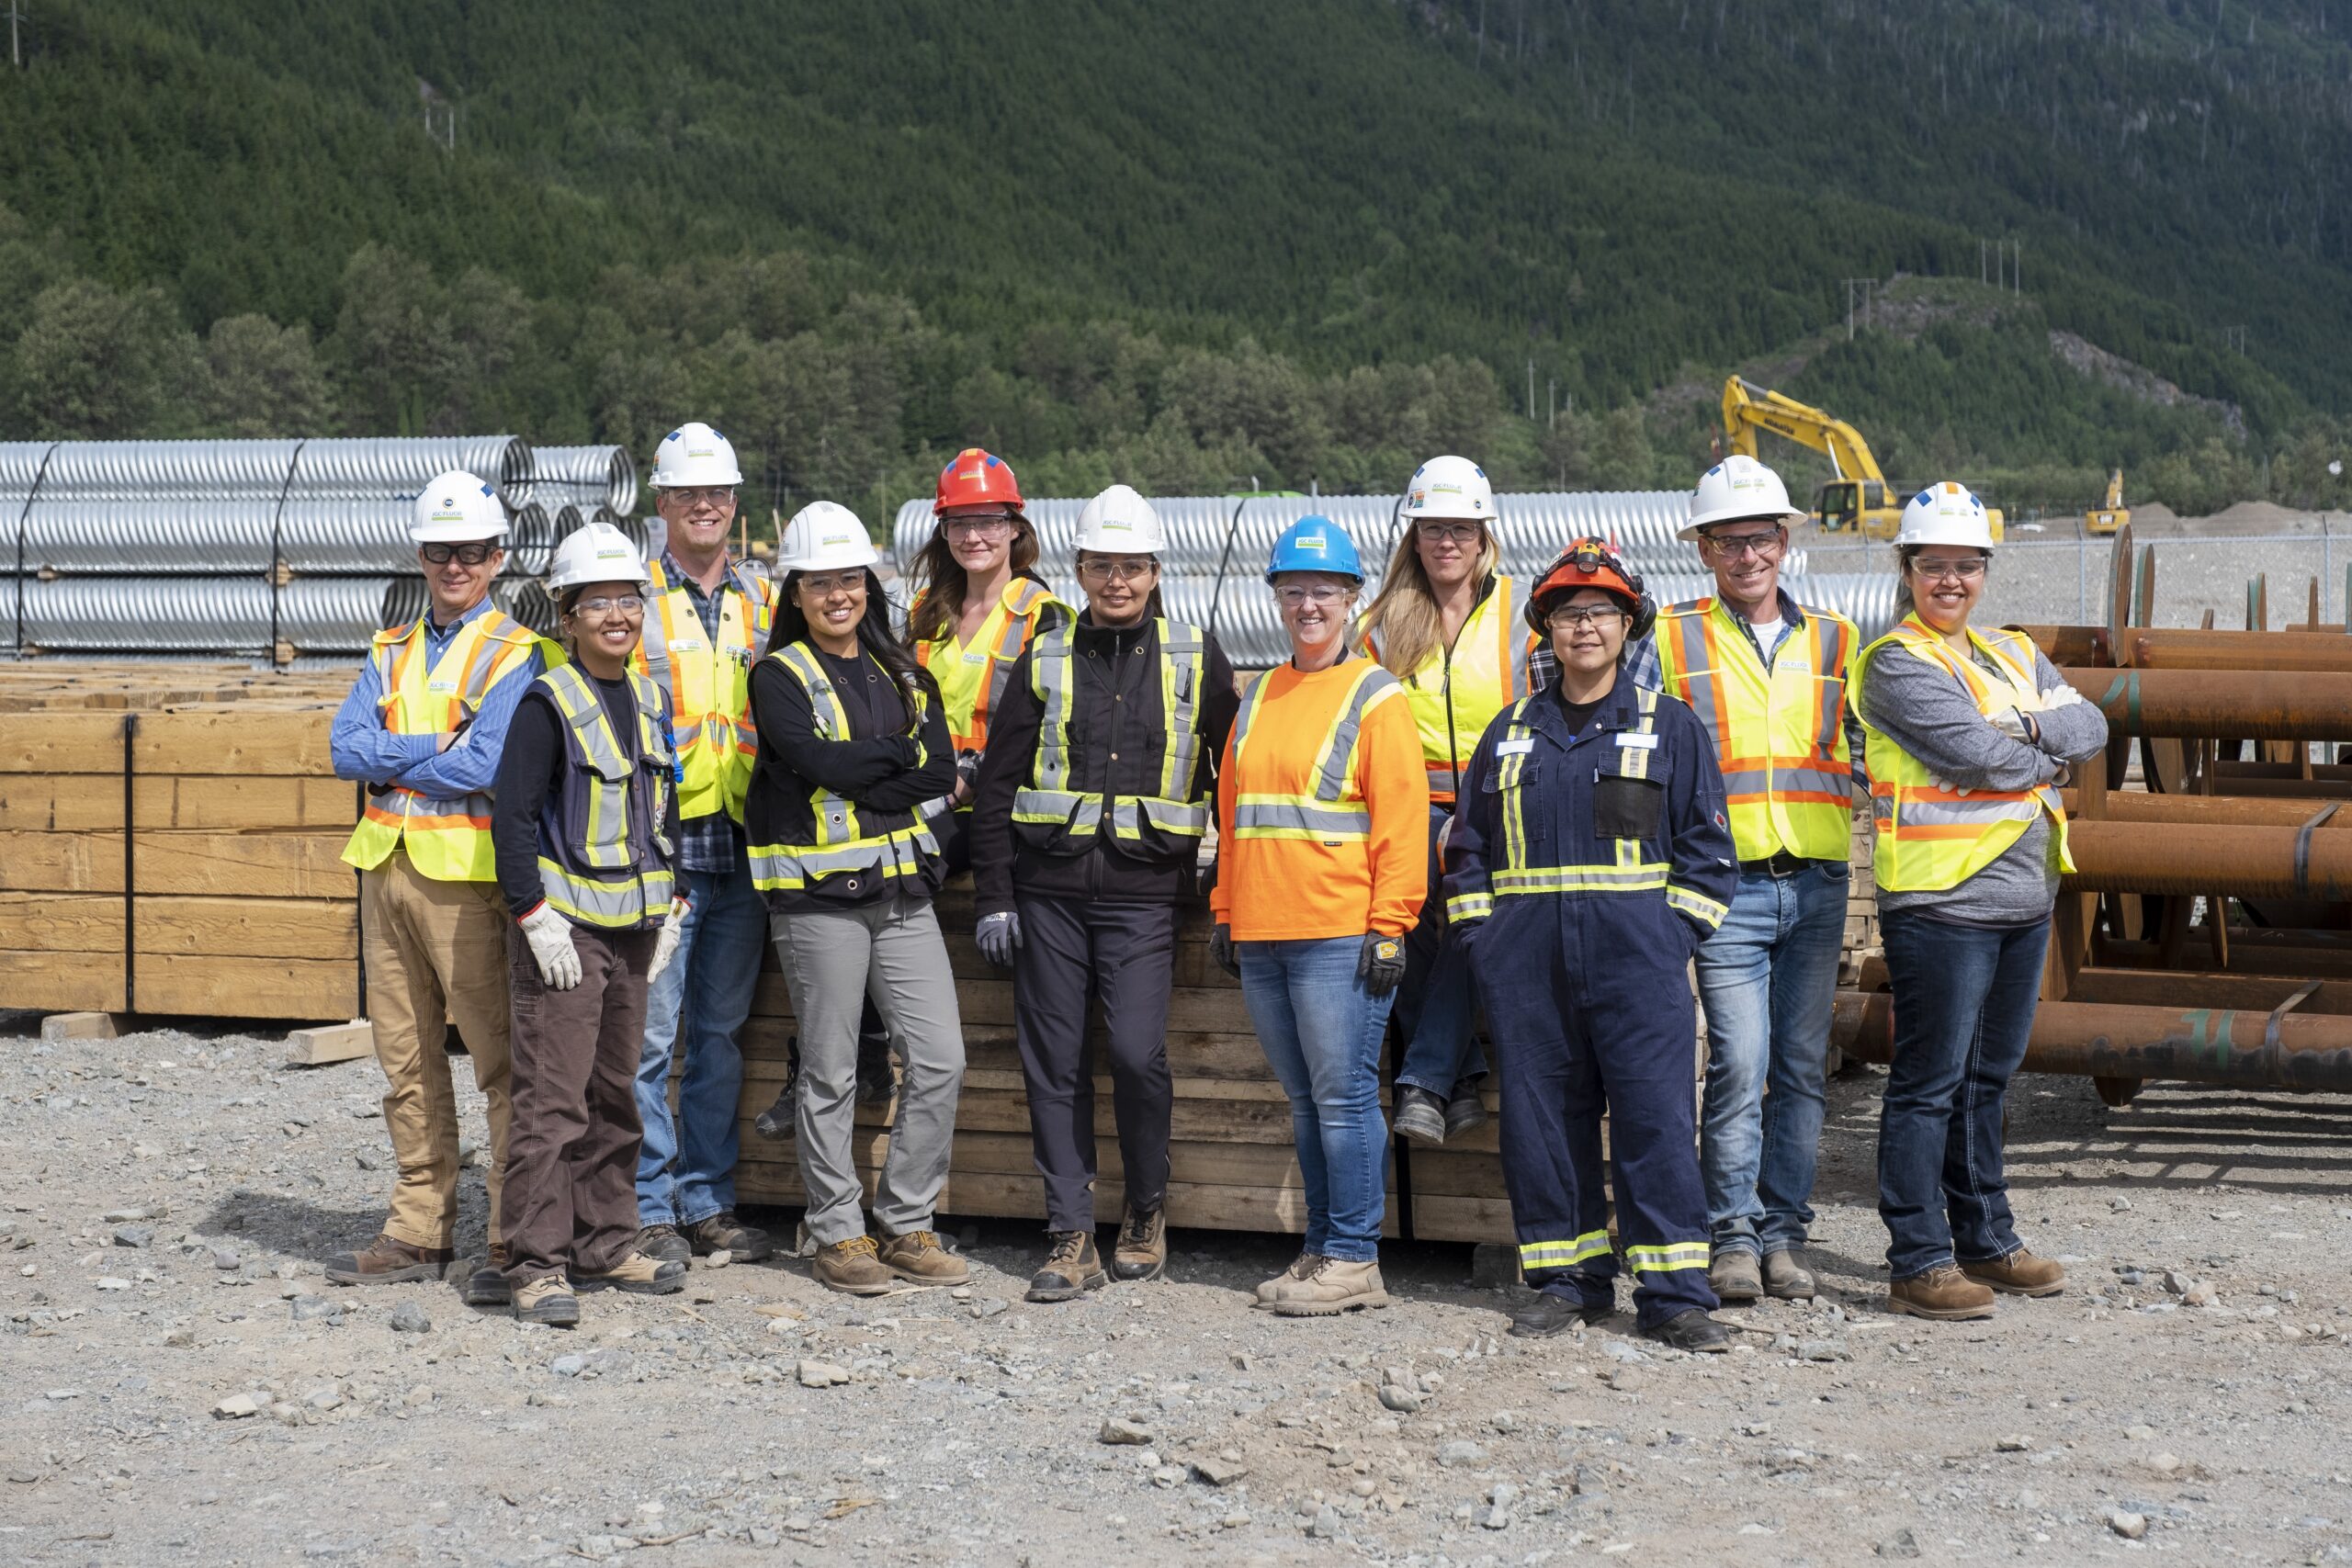 LNG Canada and JGC Fluor launch unique program to double percentage of women working in the skilled trades on the LNG Canada Project